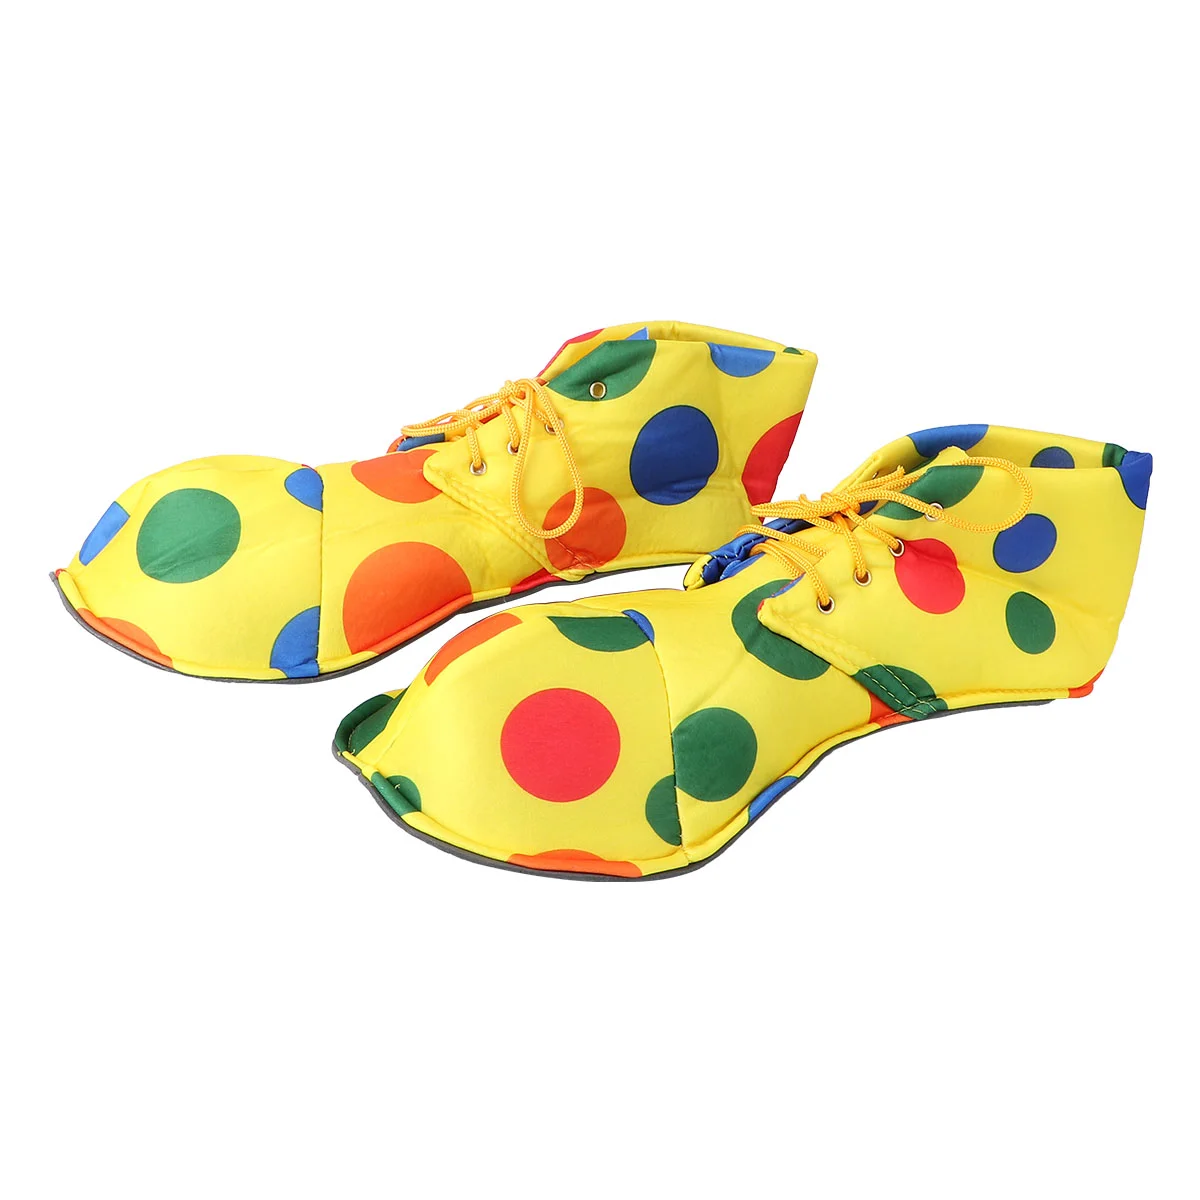 Clown Shoes Halloween Clown Shoes Cover Costumes Accessories Unisex Adult Comedy Fancy Costume Party Events Supplies